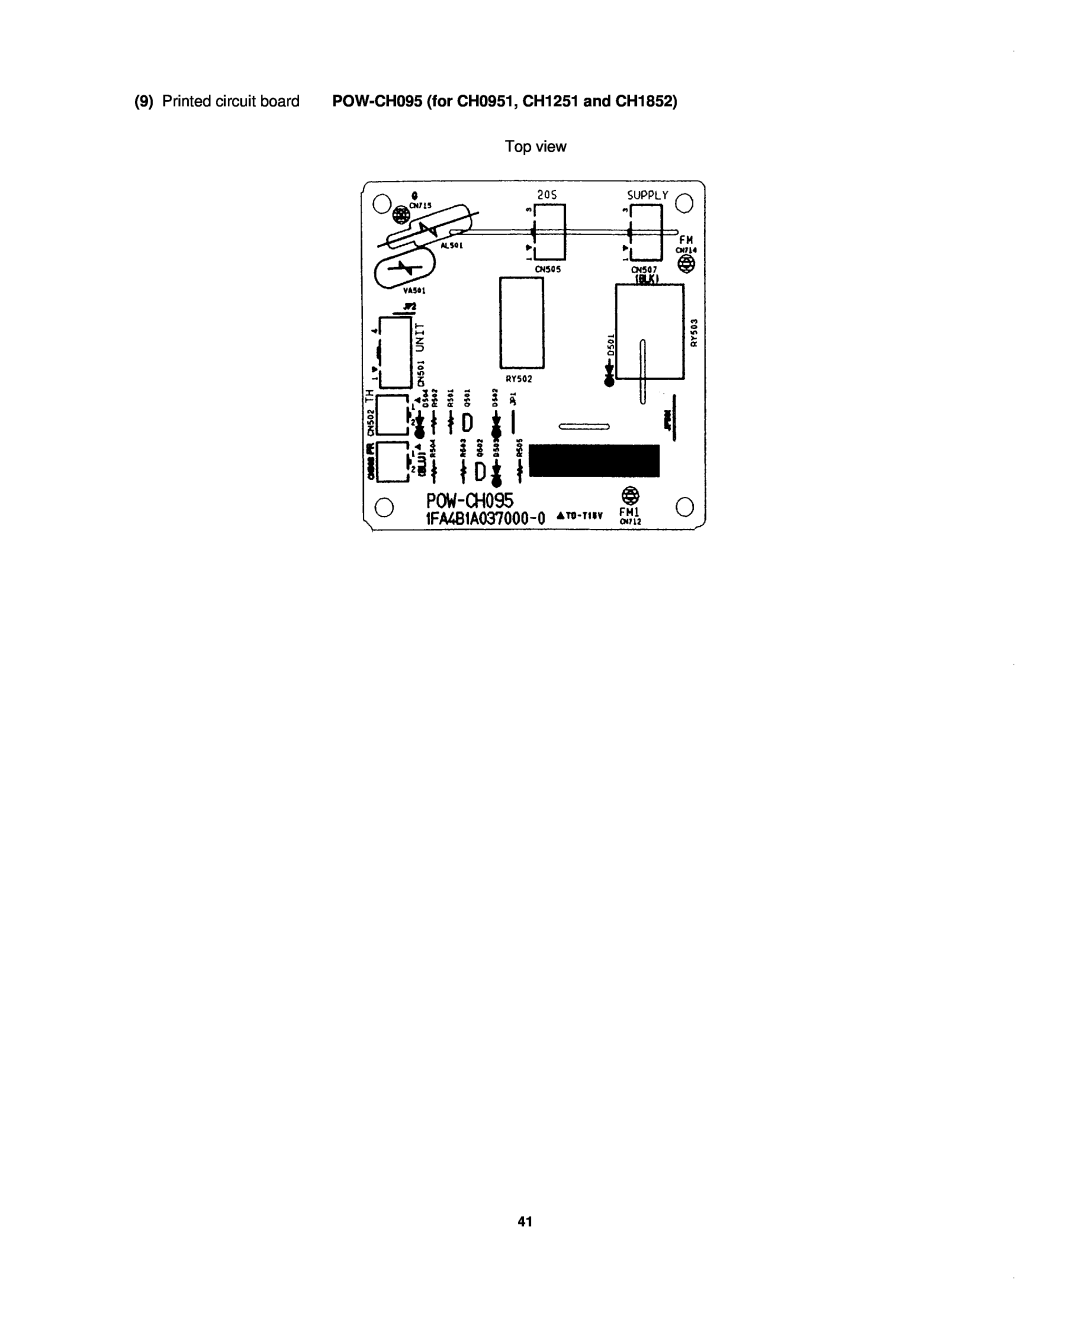 Sanyo CH1852, CH0952, KHS1852-S service manual Top view 